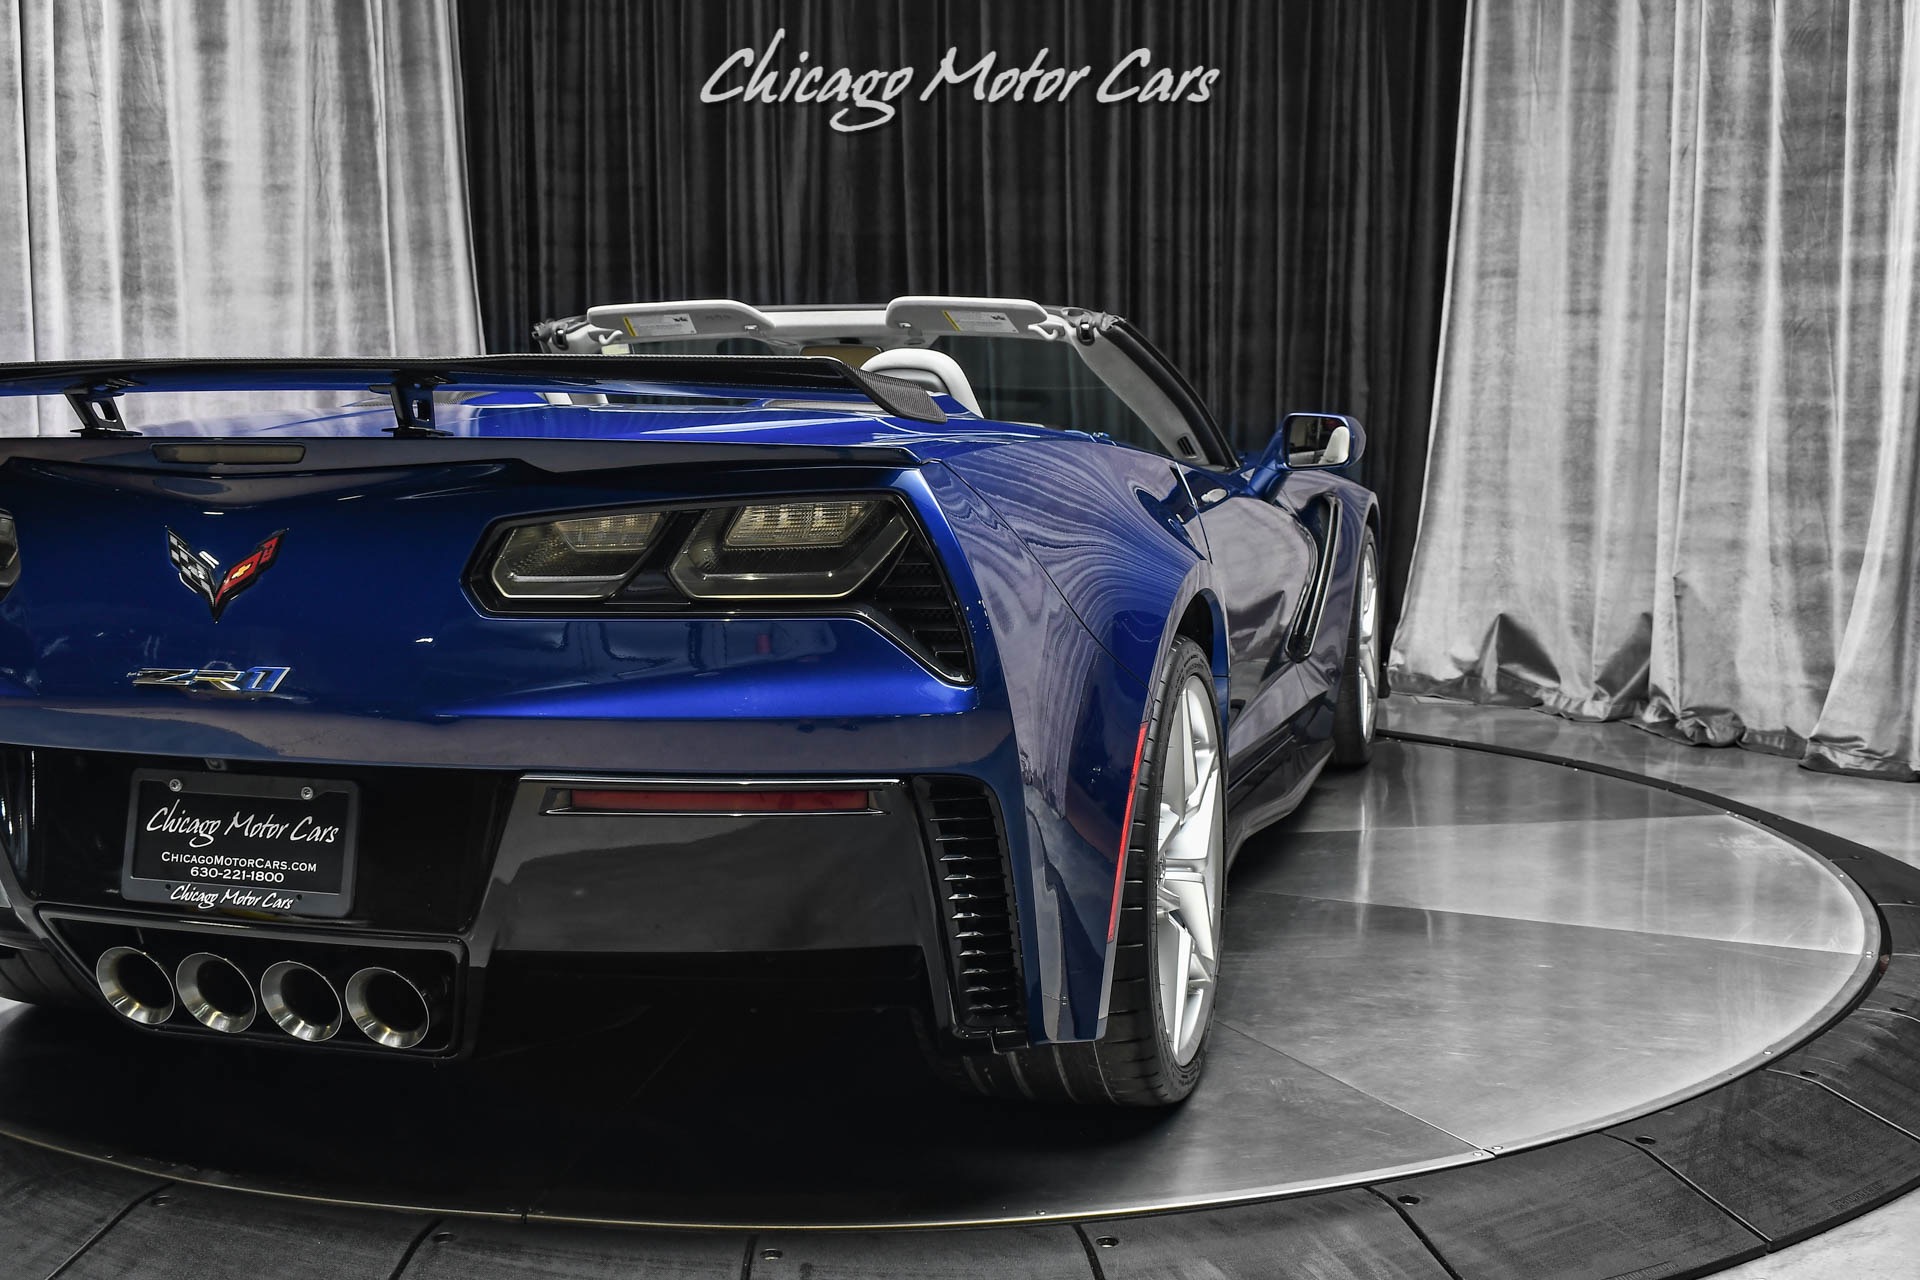 Used-2019-Chevrolet-Corvette-ZR1-3ZR-Convertible-Extremely-Rare-Color-Admiral-Blue-Metallic